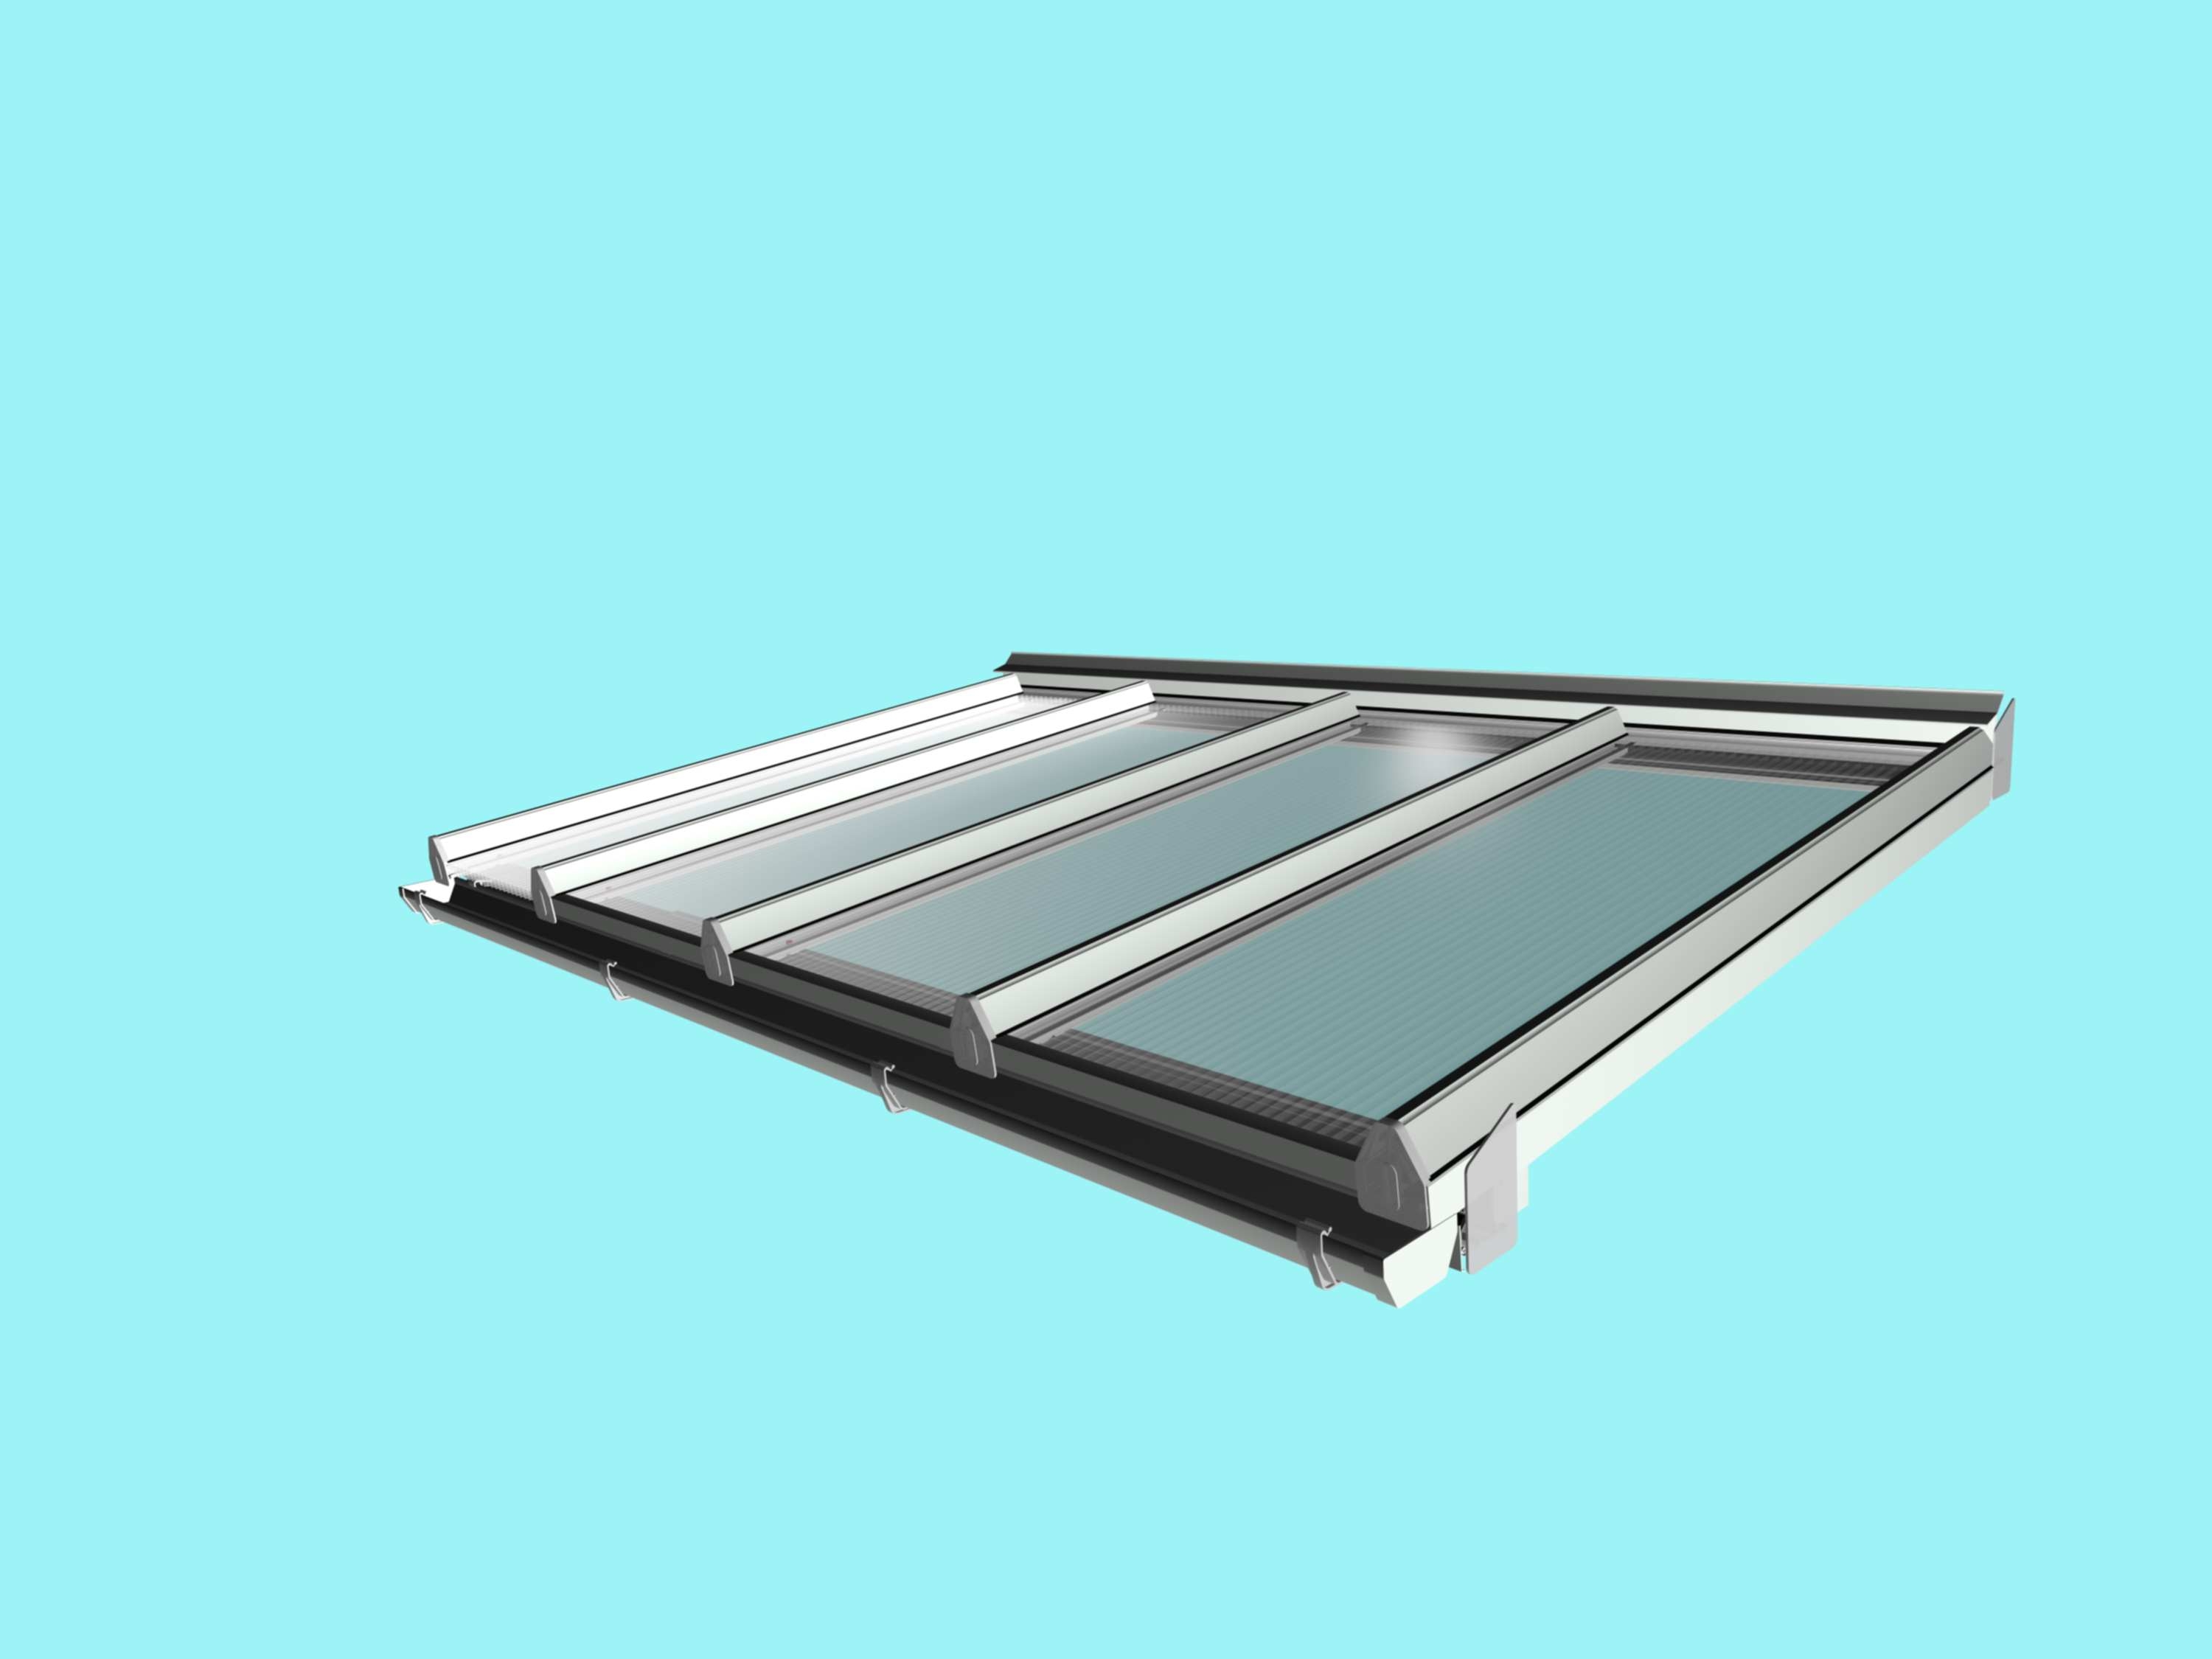 Self-Supporting DIY Conservatory Roof Kit for 16mm polycarbonate, 4.0m wide x 3.0m Projection from Omega Build